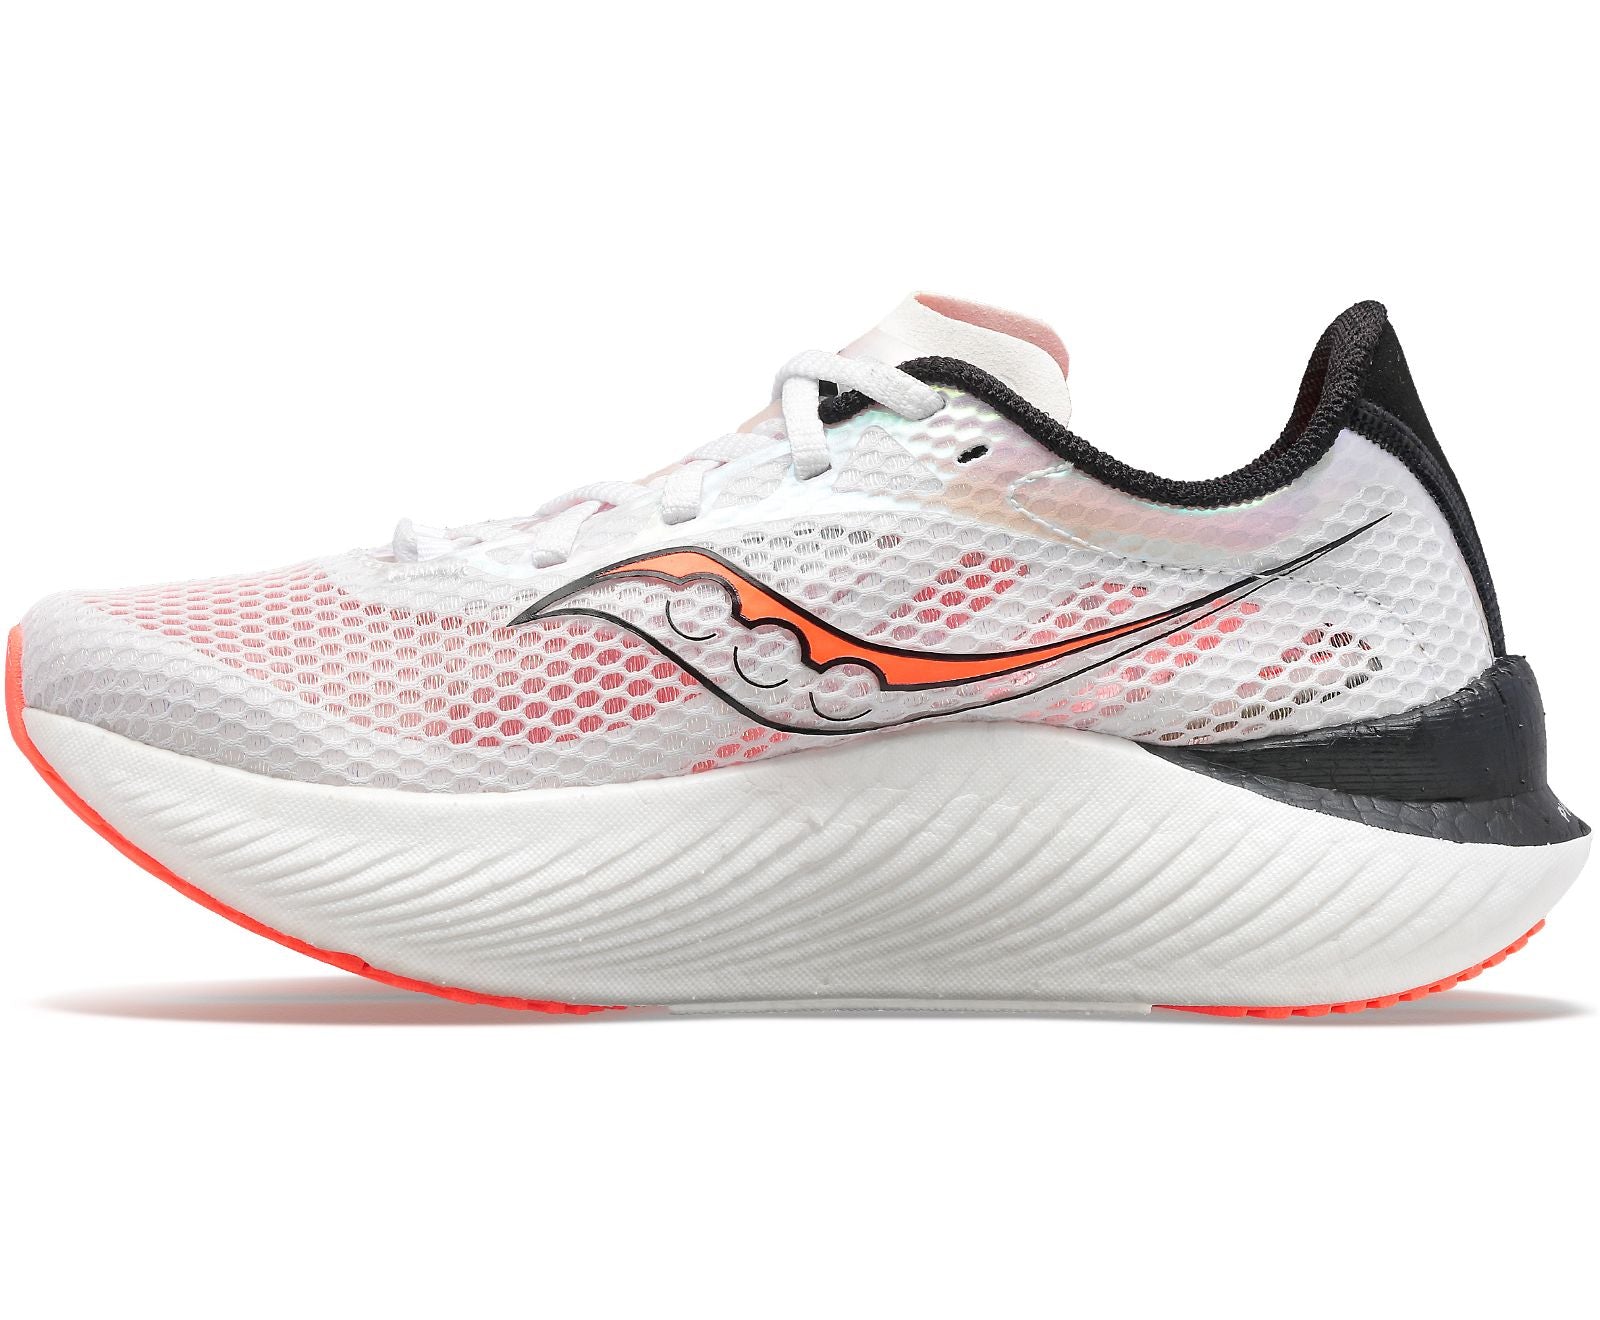 Medial view of the Men's Endorphin Pro 3 by Saucony in the color White/Black/Vizired